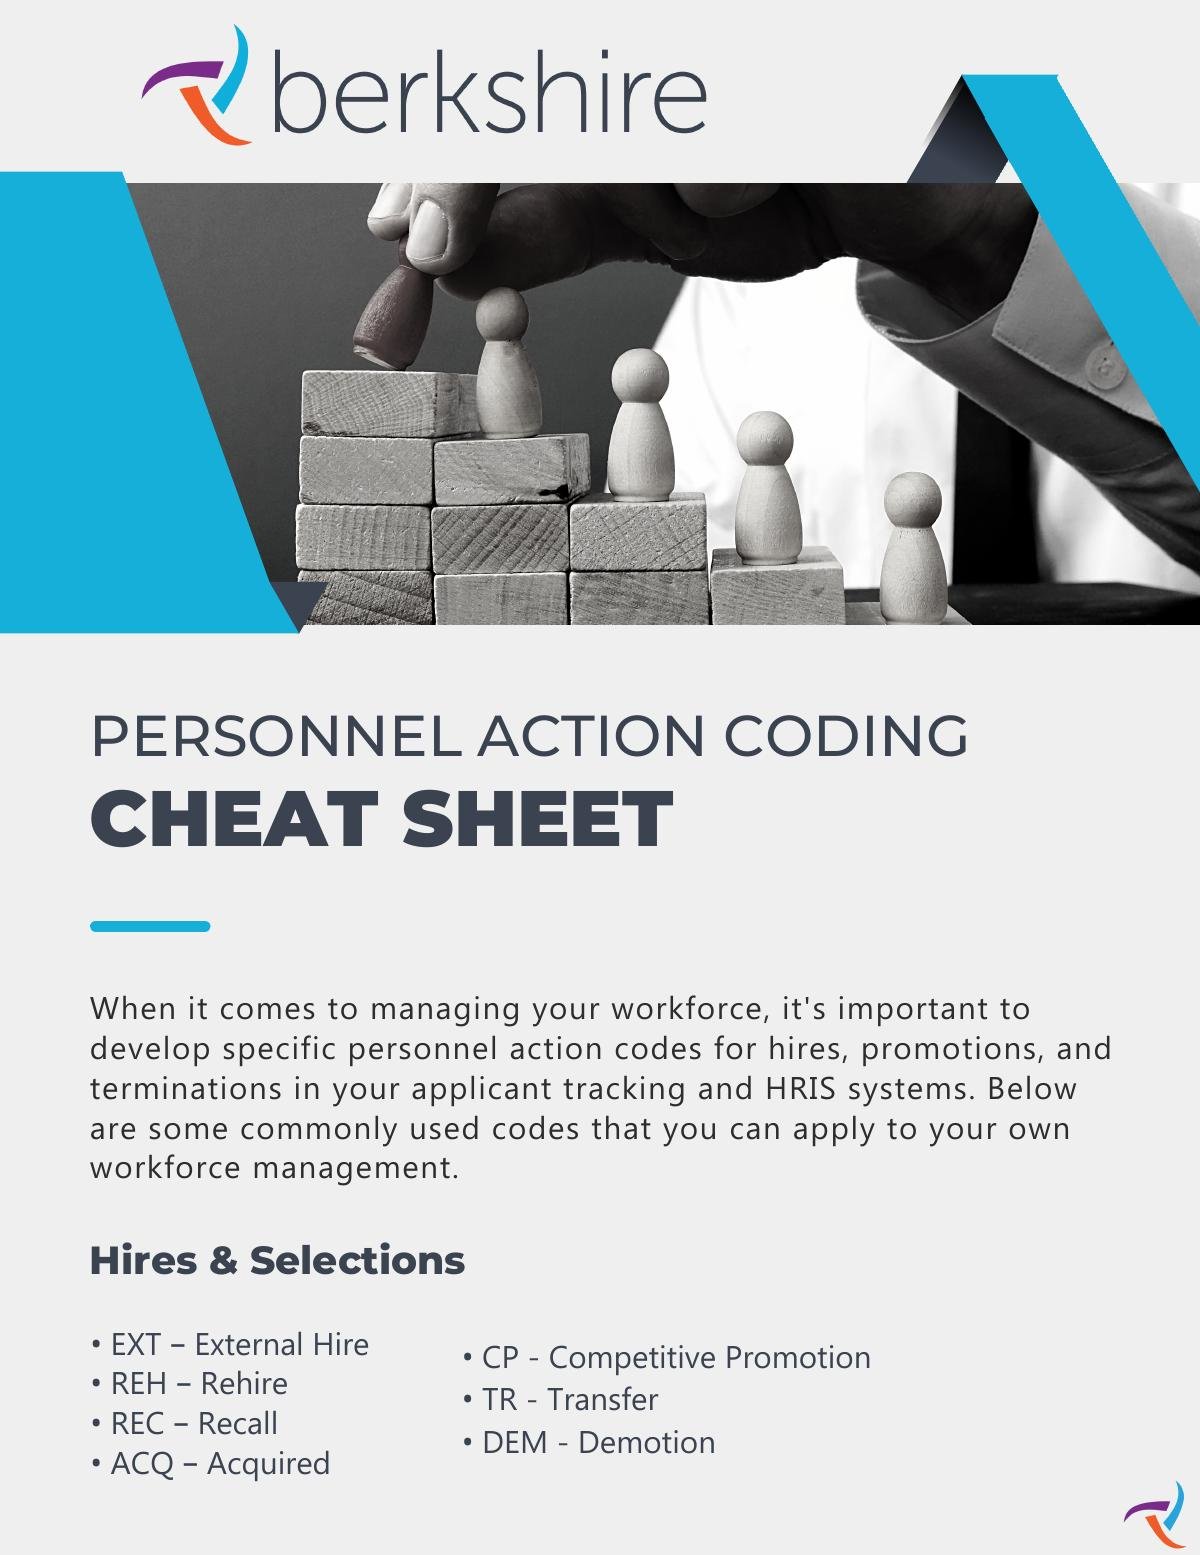 Personnel Action Coding Cheat Sheet